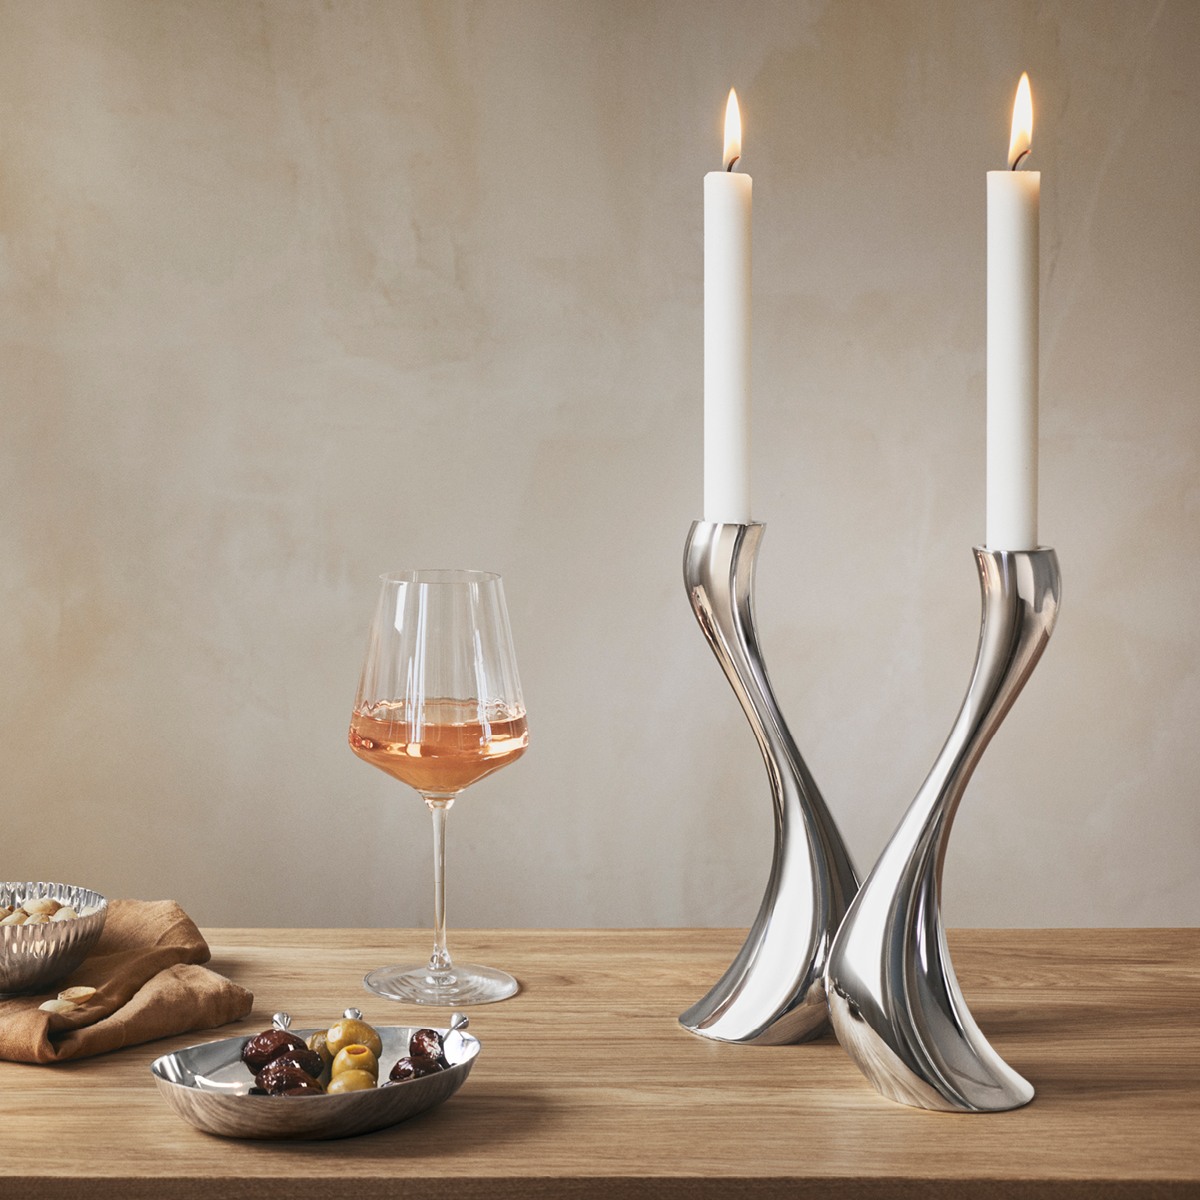 https://res.cloudinary.com/georgjensen/image/upload/f_auto,dpr_2/w_auto,c_scale/products/images/hi-res/10019230_BERNADOTTE_red_wine_glass?_i=AG